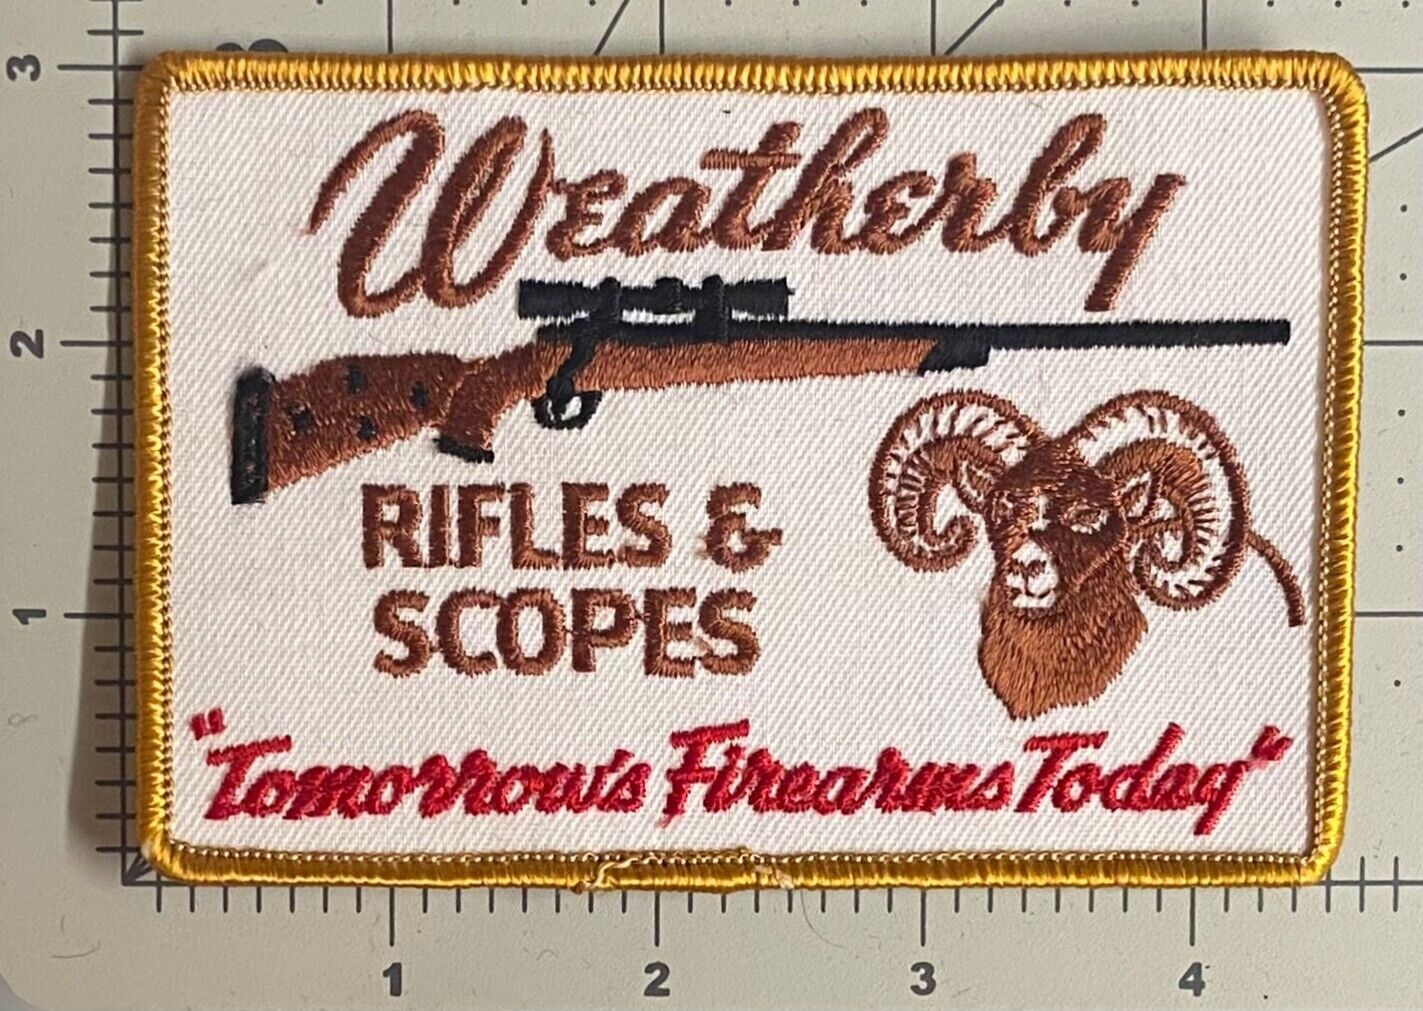 WEATHERBY RIFLES & SCOPES Embroidered Patch~RAM’S HEAD~HUNTER HUNTING GUNS AMMO